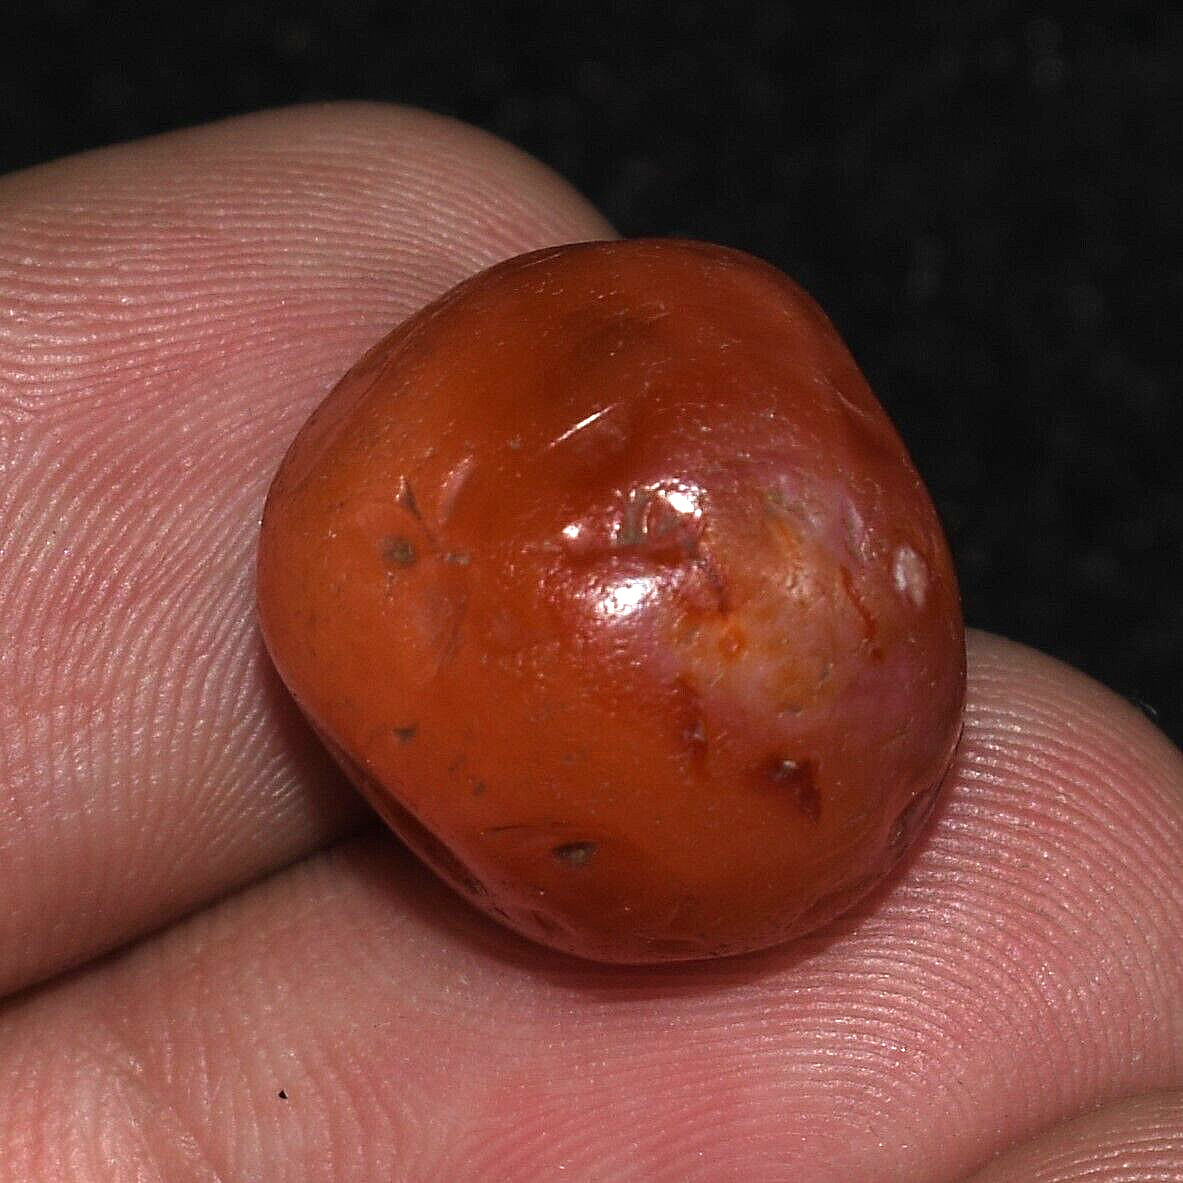 Genuine Ancient Round Middle Eastern Carnelian Stone Bead in Perfect Condition